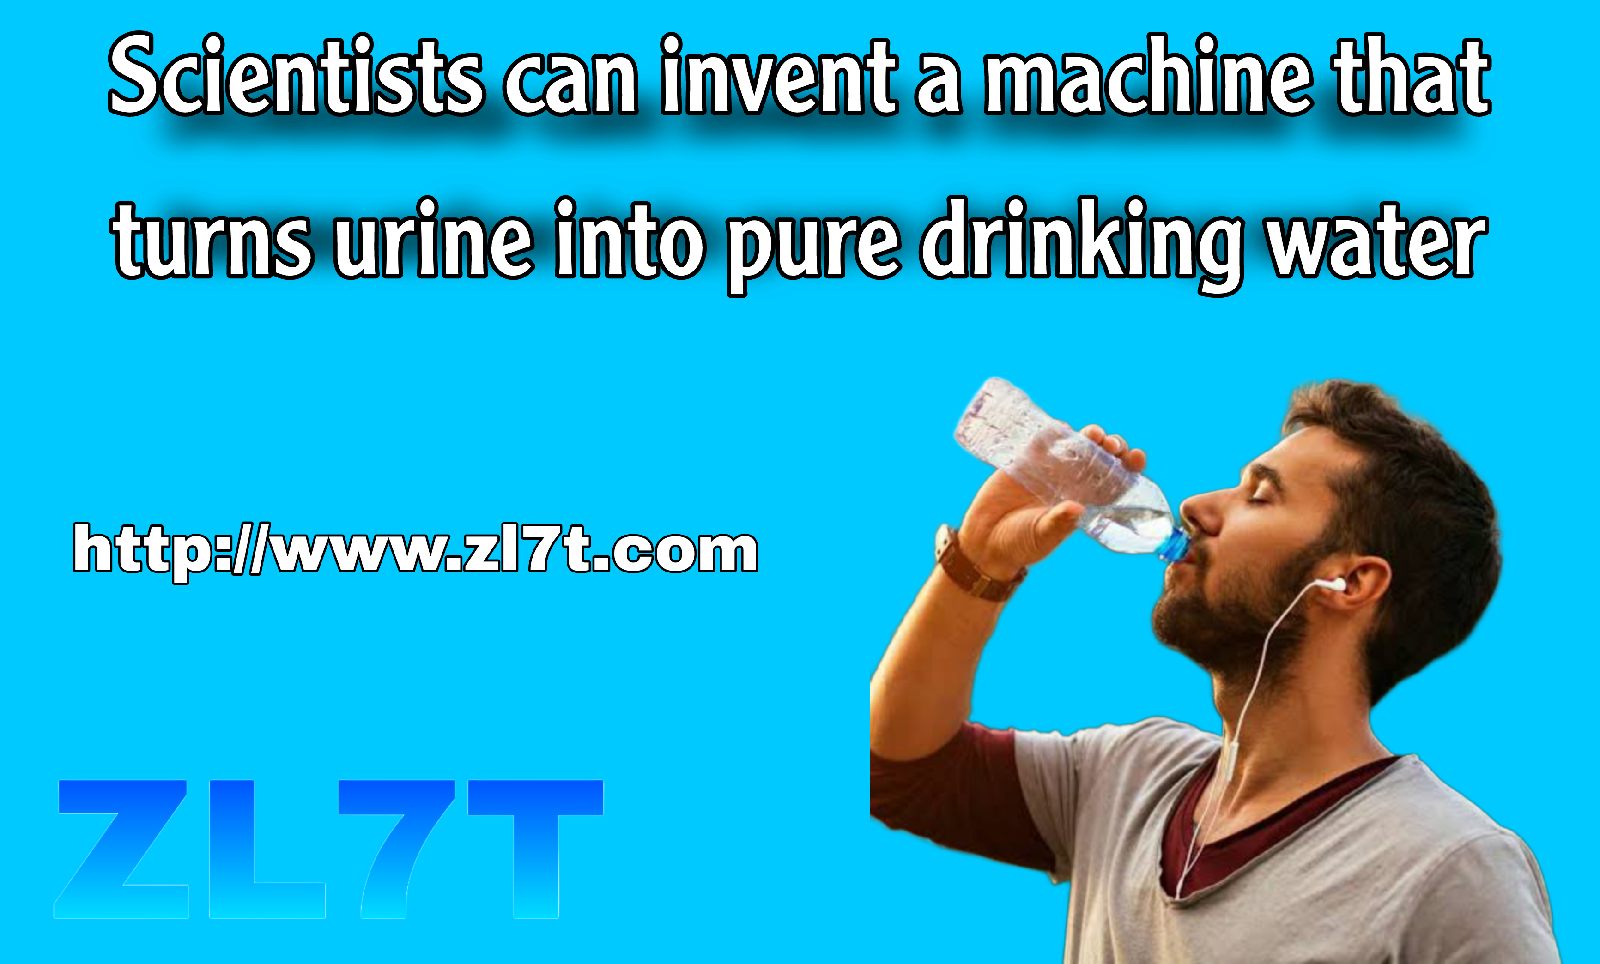 Scientists Invent Device to Convert Urine into Clean Drinking Water